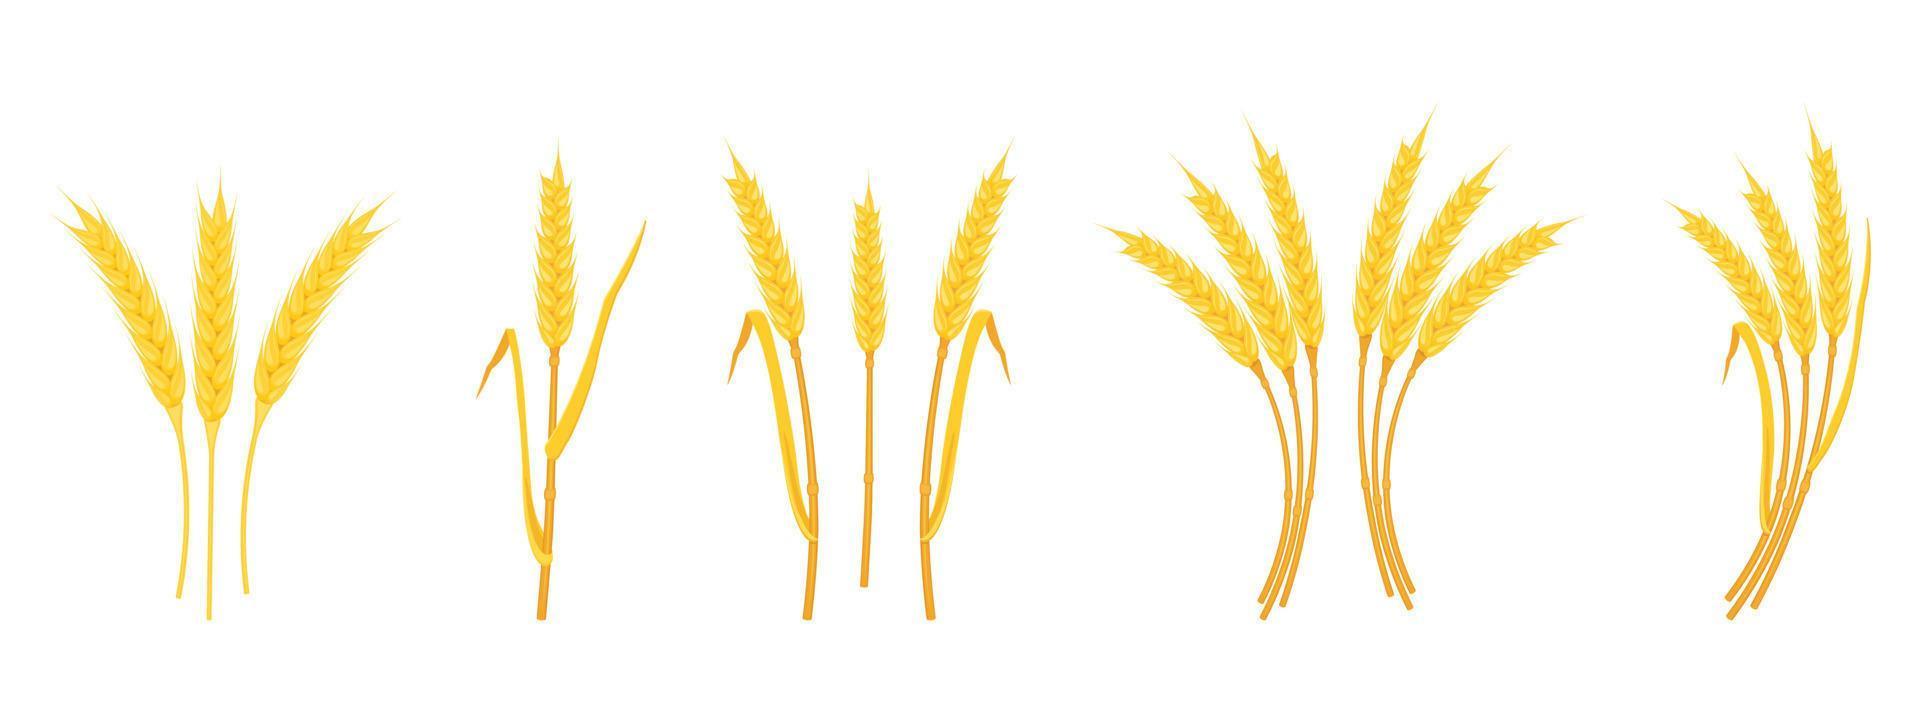 Ears of wheat with spikes and stems of various shapes isolated on white background. vector